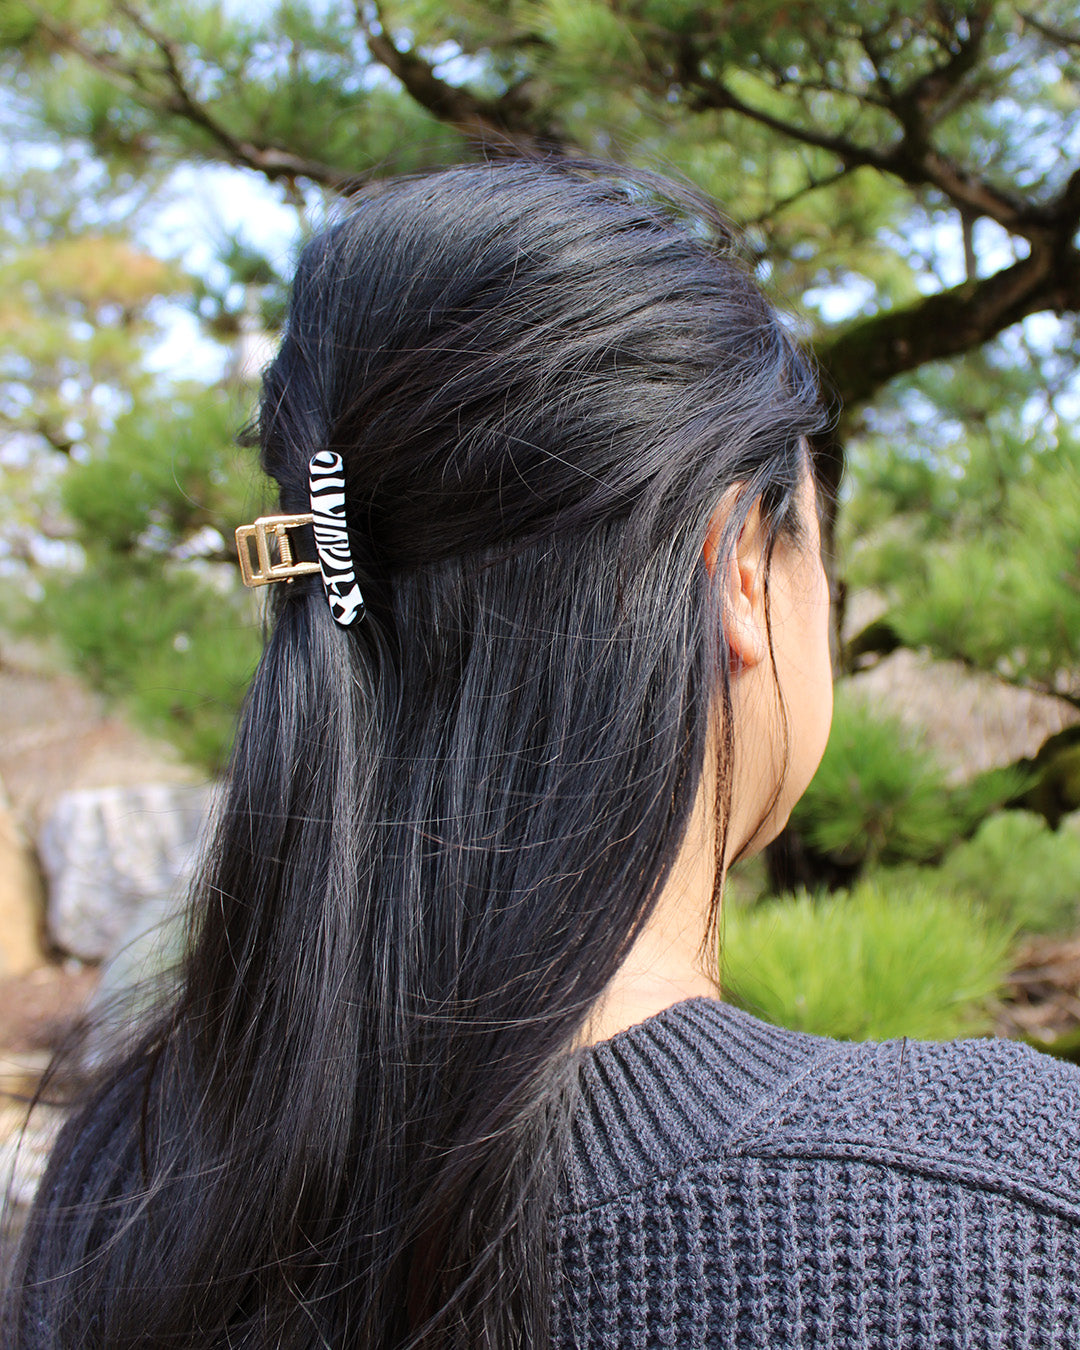 person with long black hair clipped with a black and white claw clip.